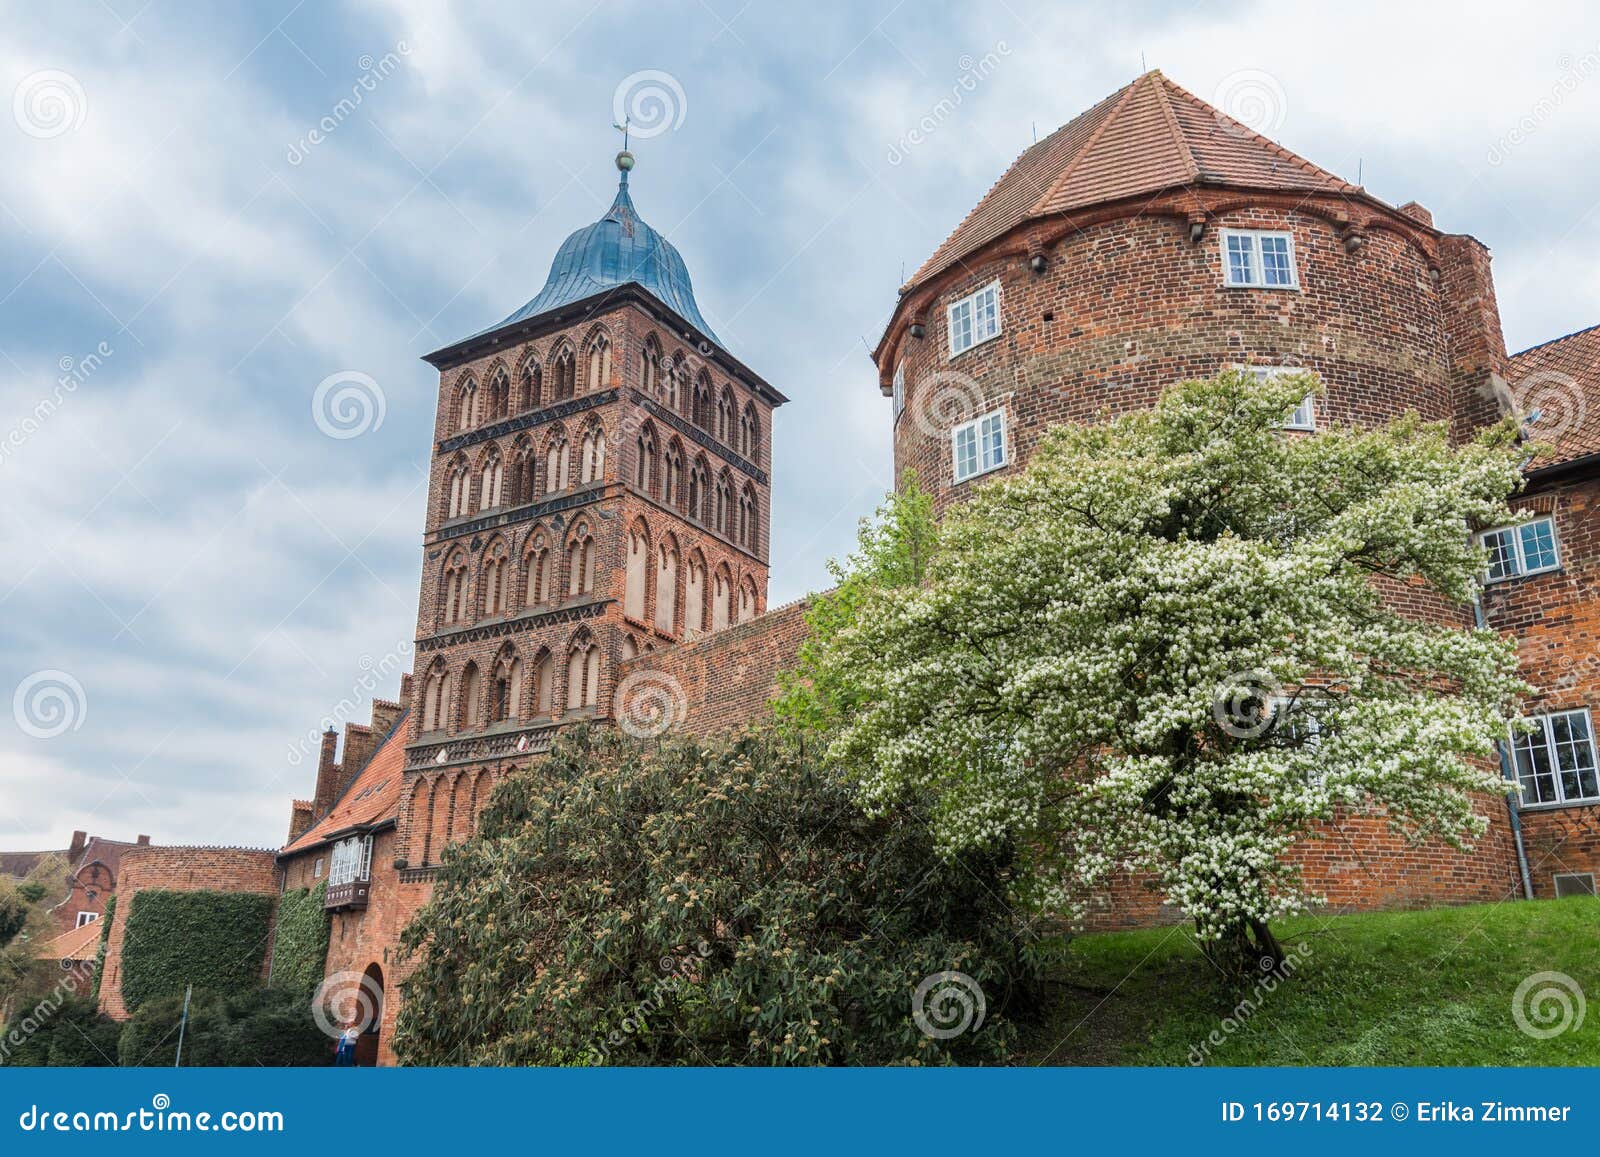 view the beautiful buildings of lubeck